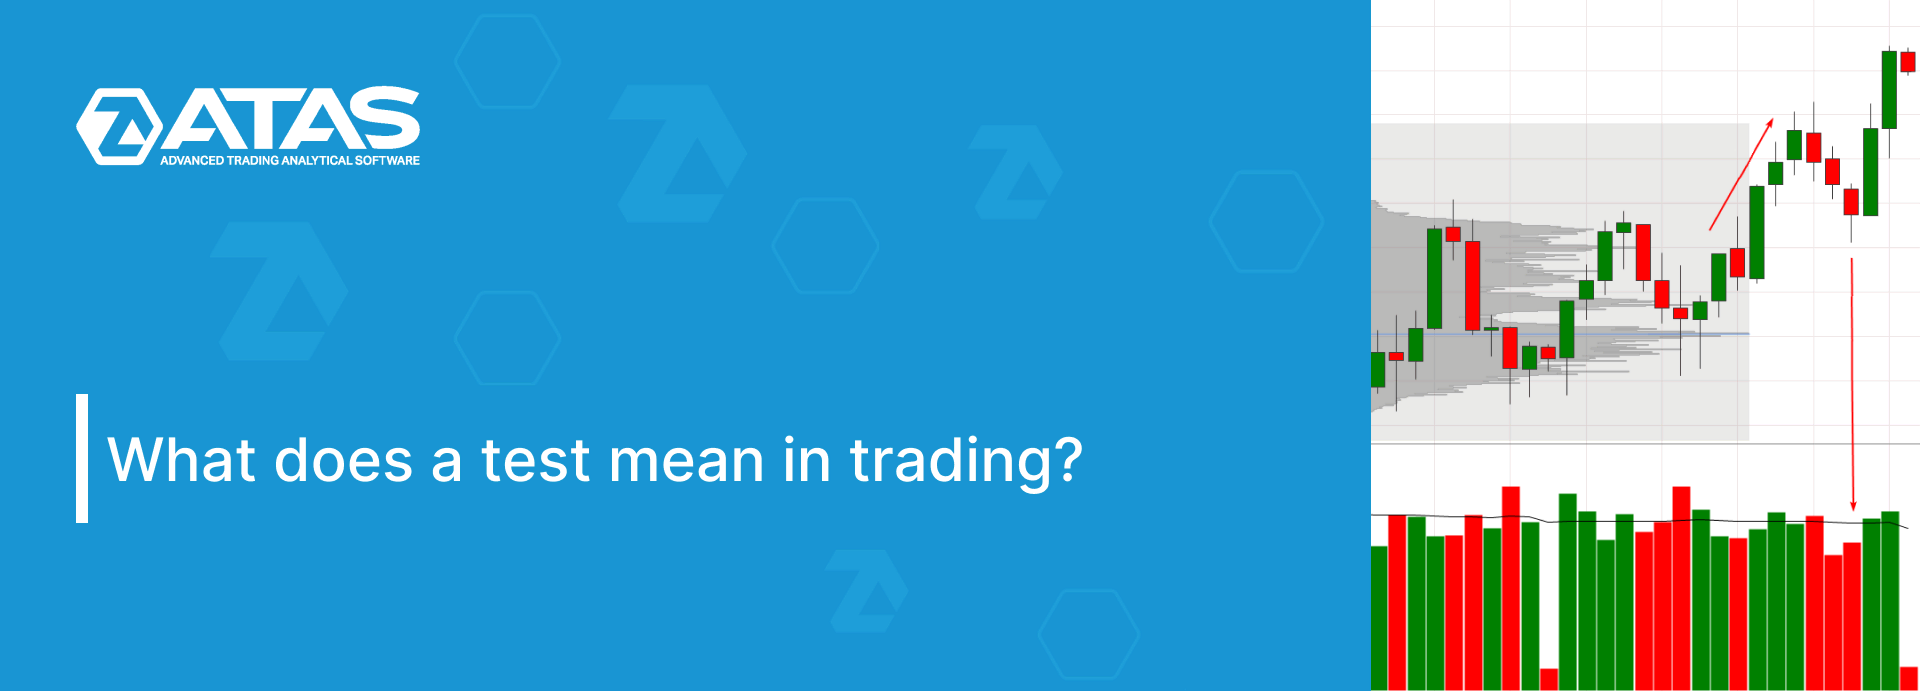 What does a test mean in trading